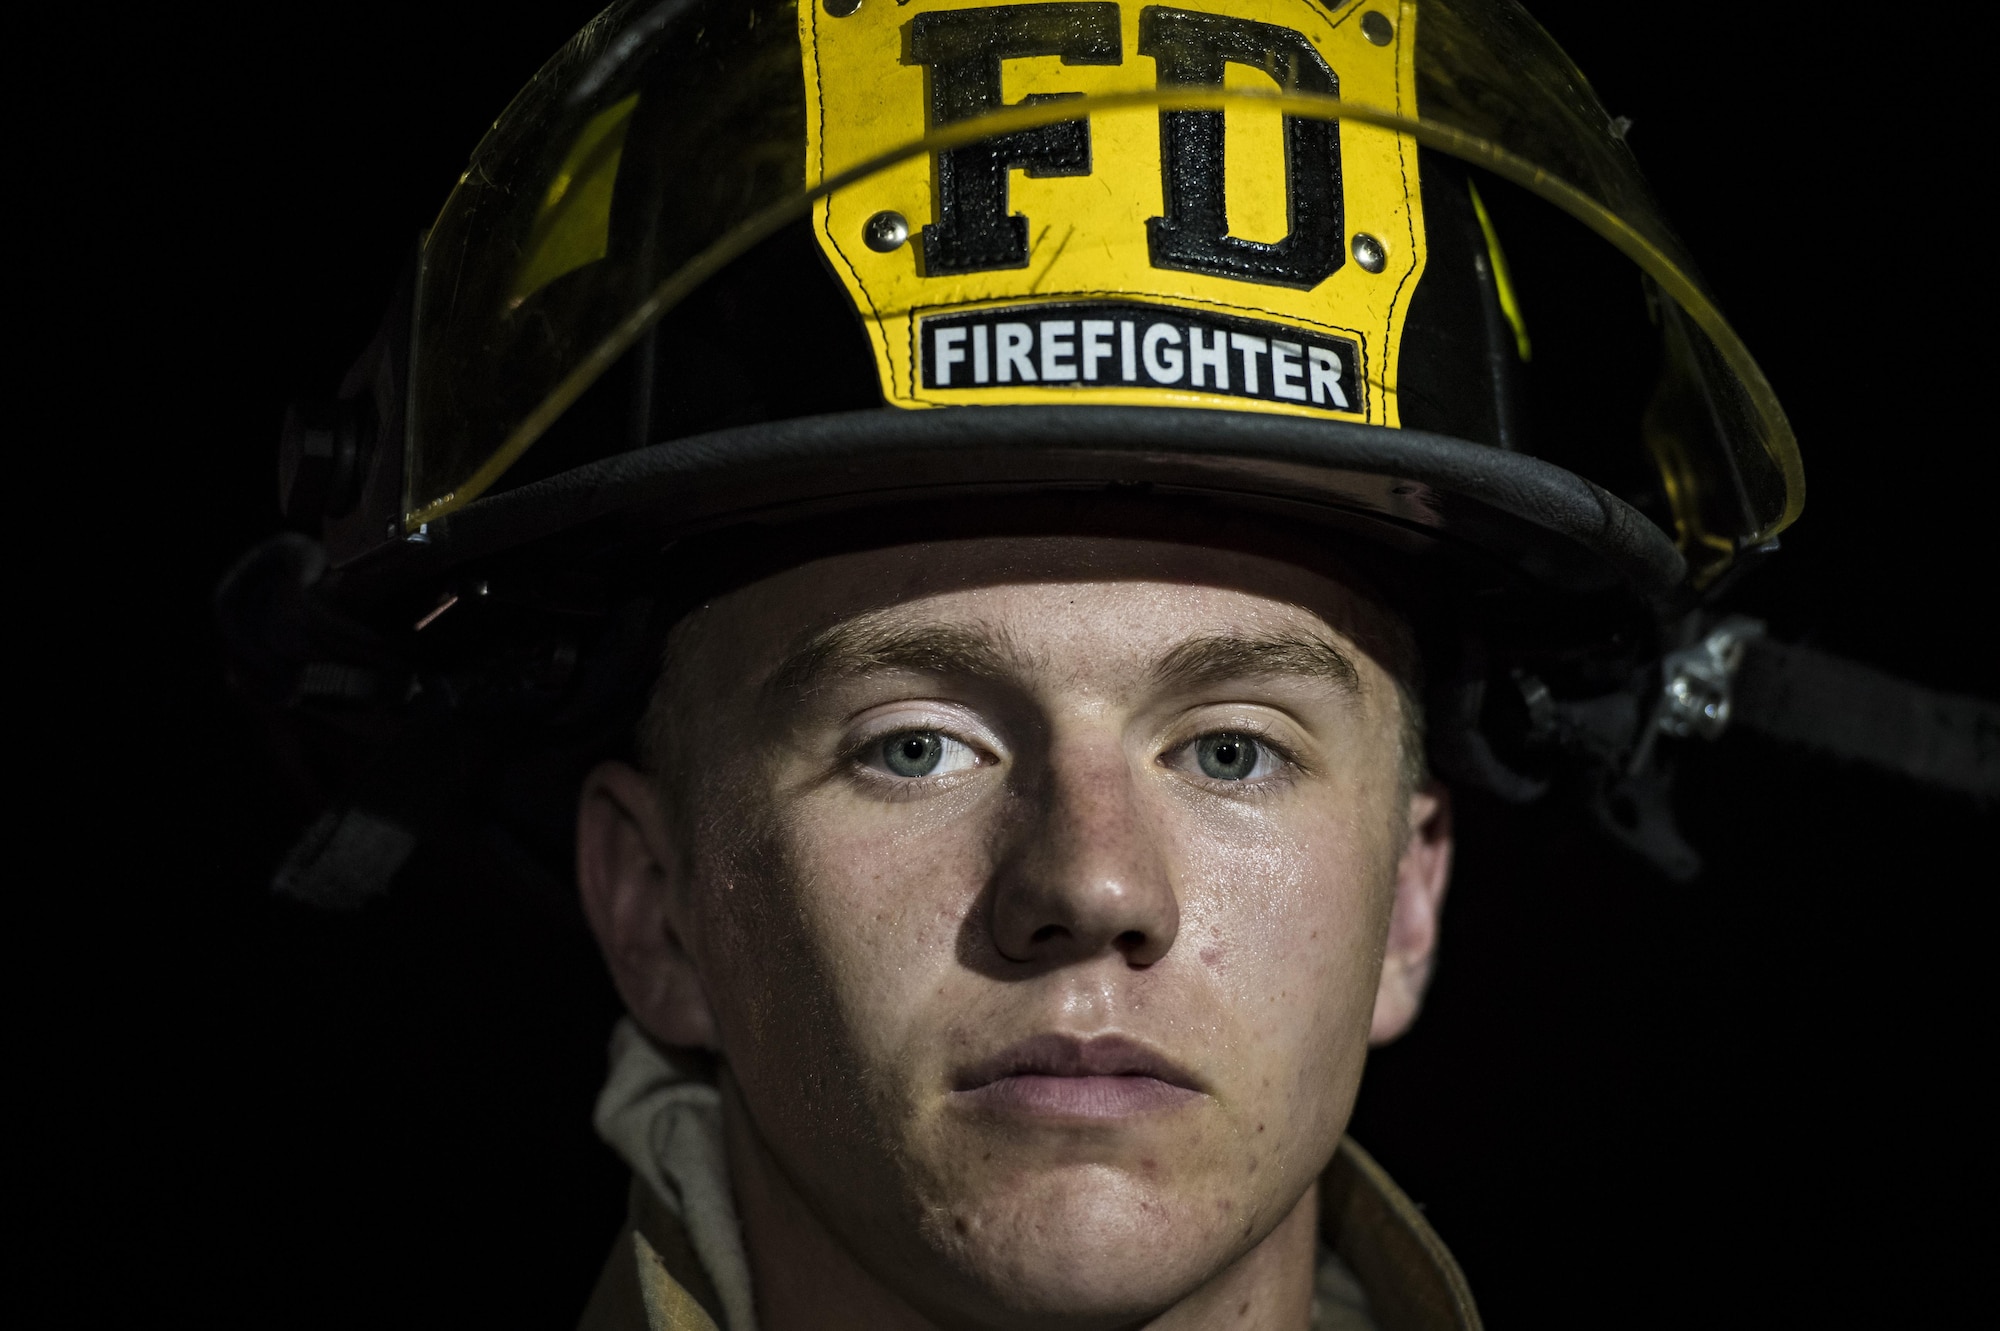 Airman 1st Class Austin Taylor, 23d Civil Engineer Squadron firefighter, poses for a photo during nighttime live-fire training, Nov. 9, 2017, at Moody AFB, Ga. Moody and the Valdosta Fire Department joined forces to prepare for the possibility of nighttime aircraft fire operations.  (U.S. Air Force photo by Senior Airman Janiqua P. Robinson)